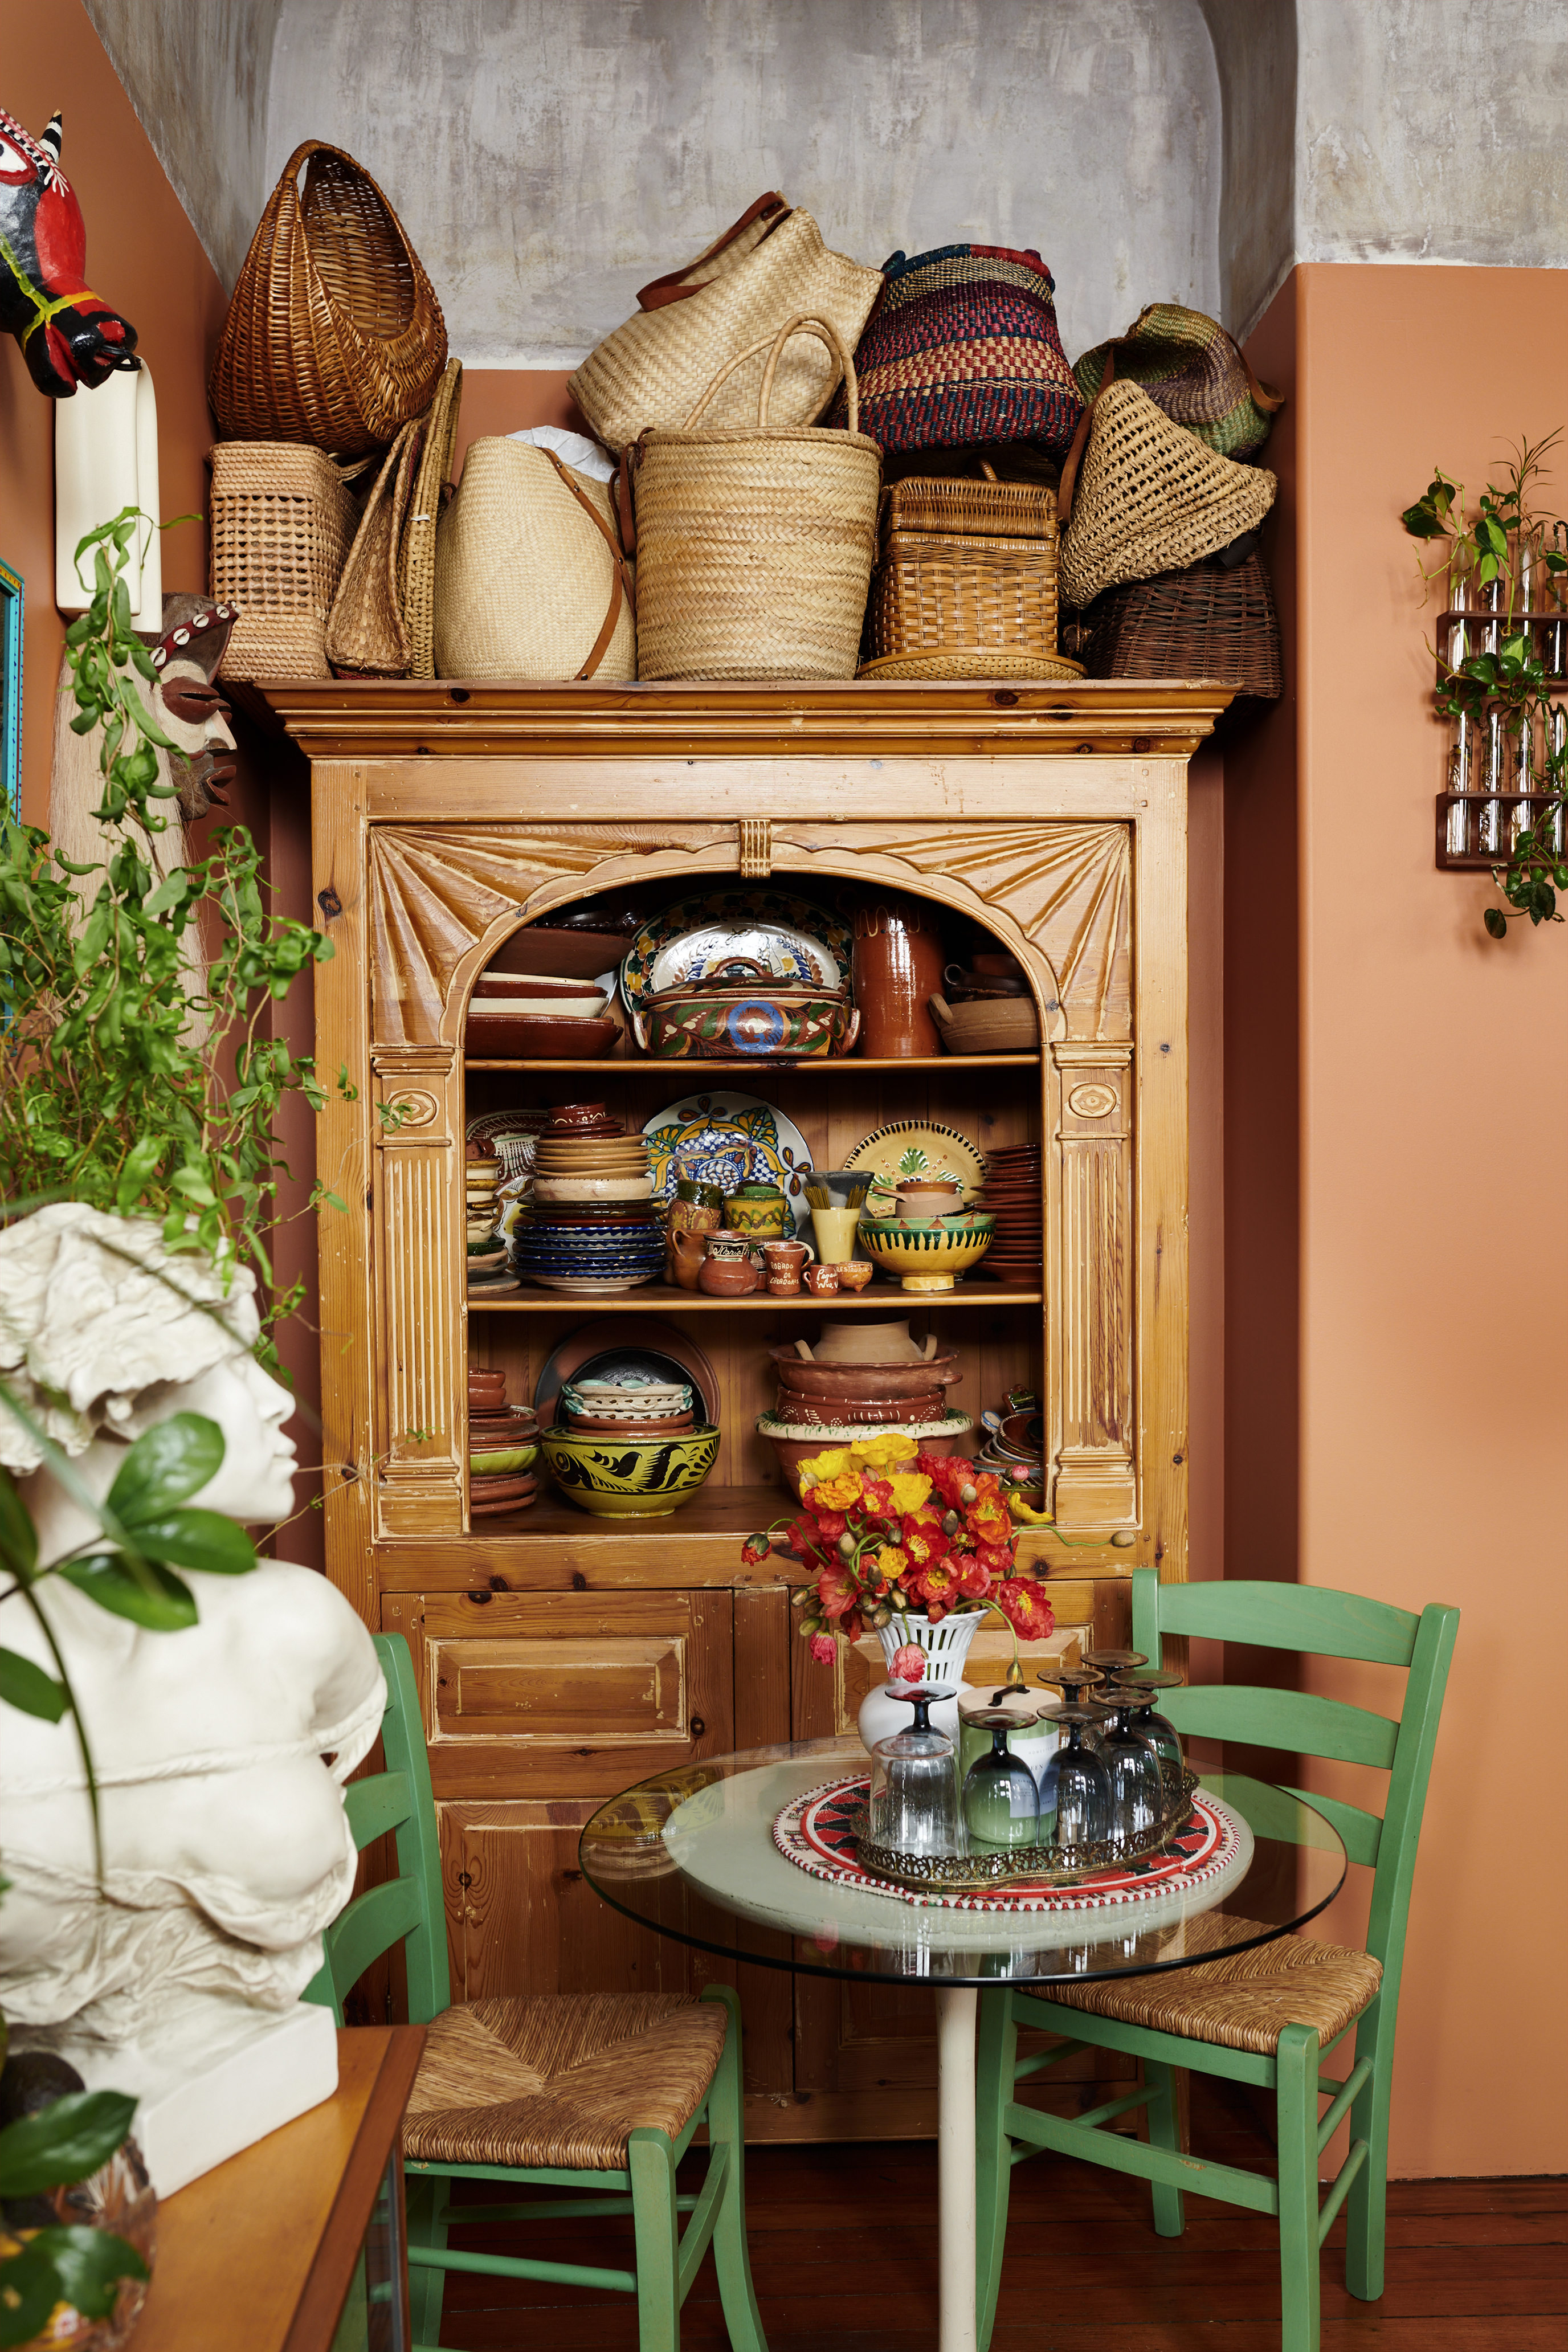 A wooden cabinet filled with colorful ceramics and tableware, topped with wicker baskets, stands next to a glass table with green chairs, adorned with flowers and glassware.